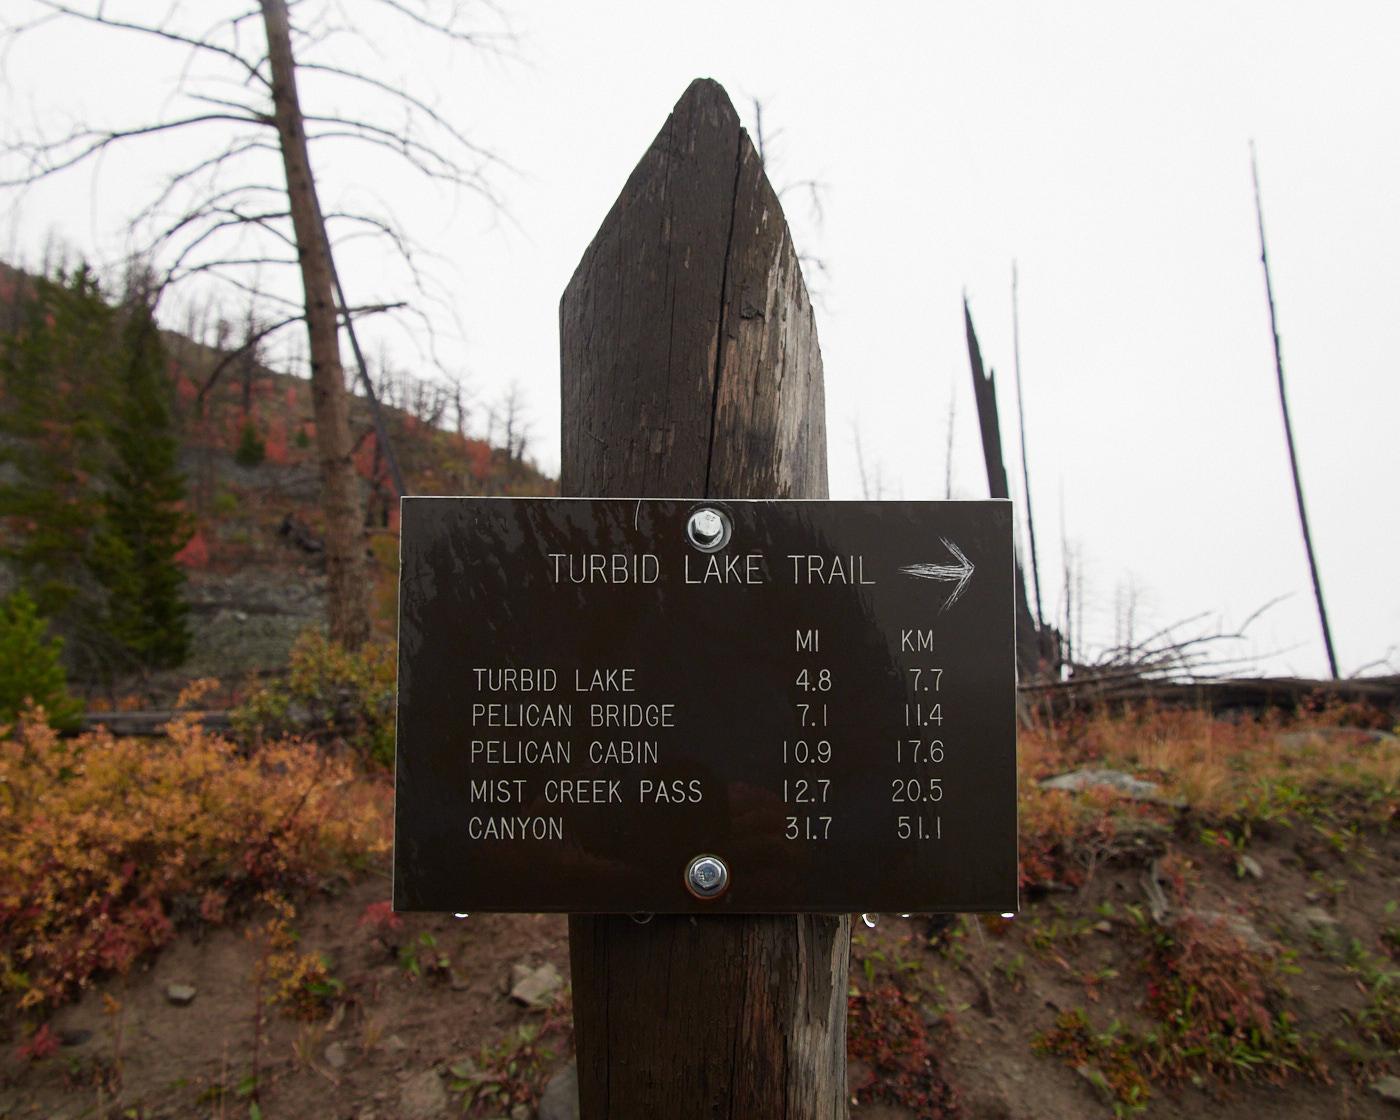 A signpost indicating nearby trails, including one I planned to hike...